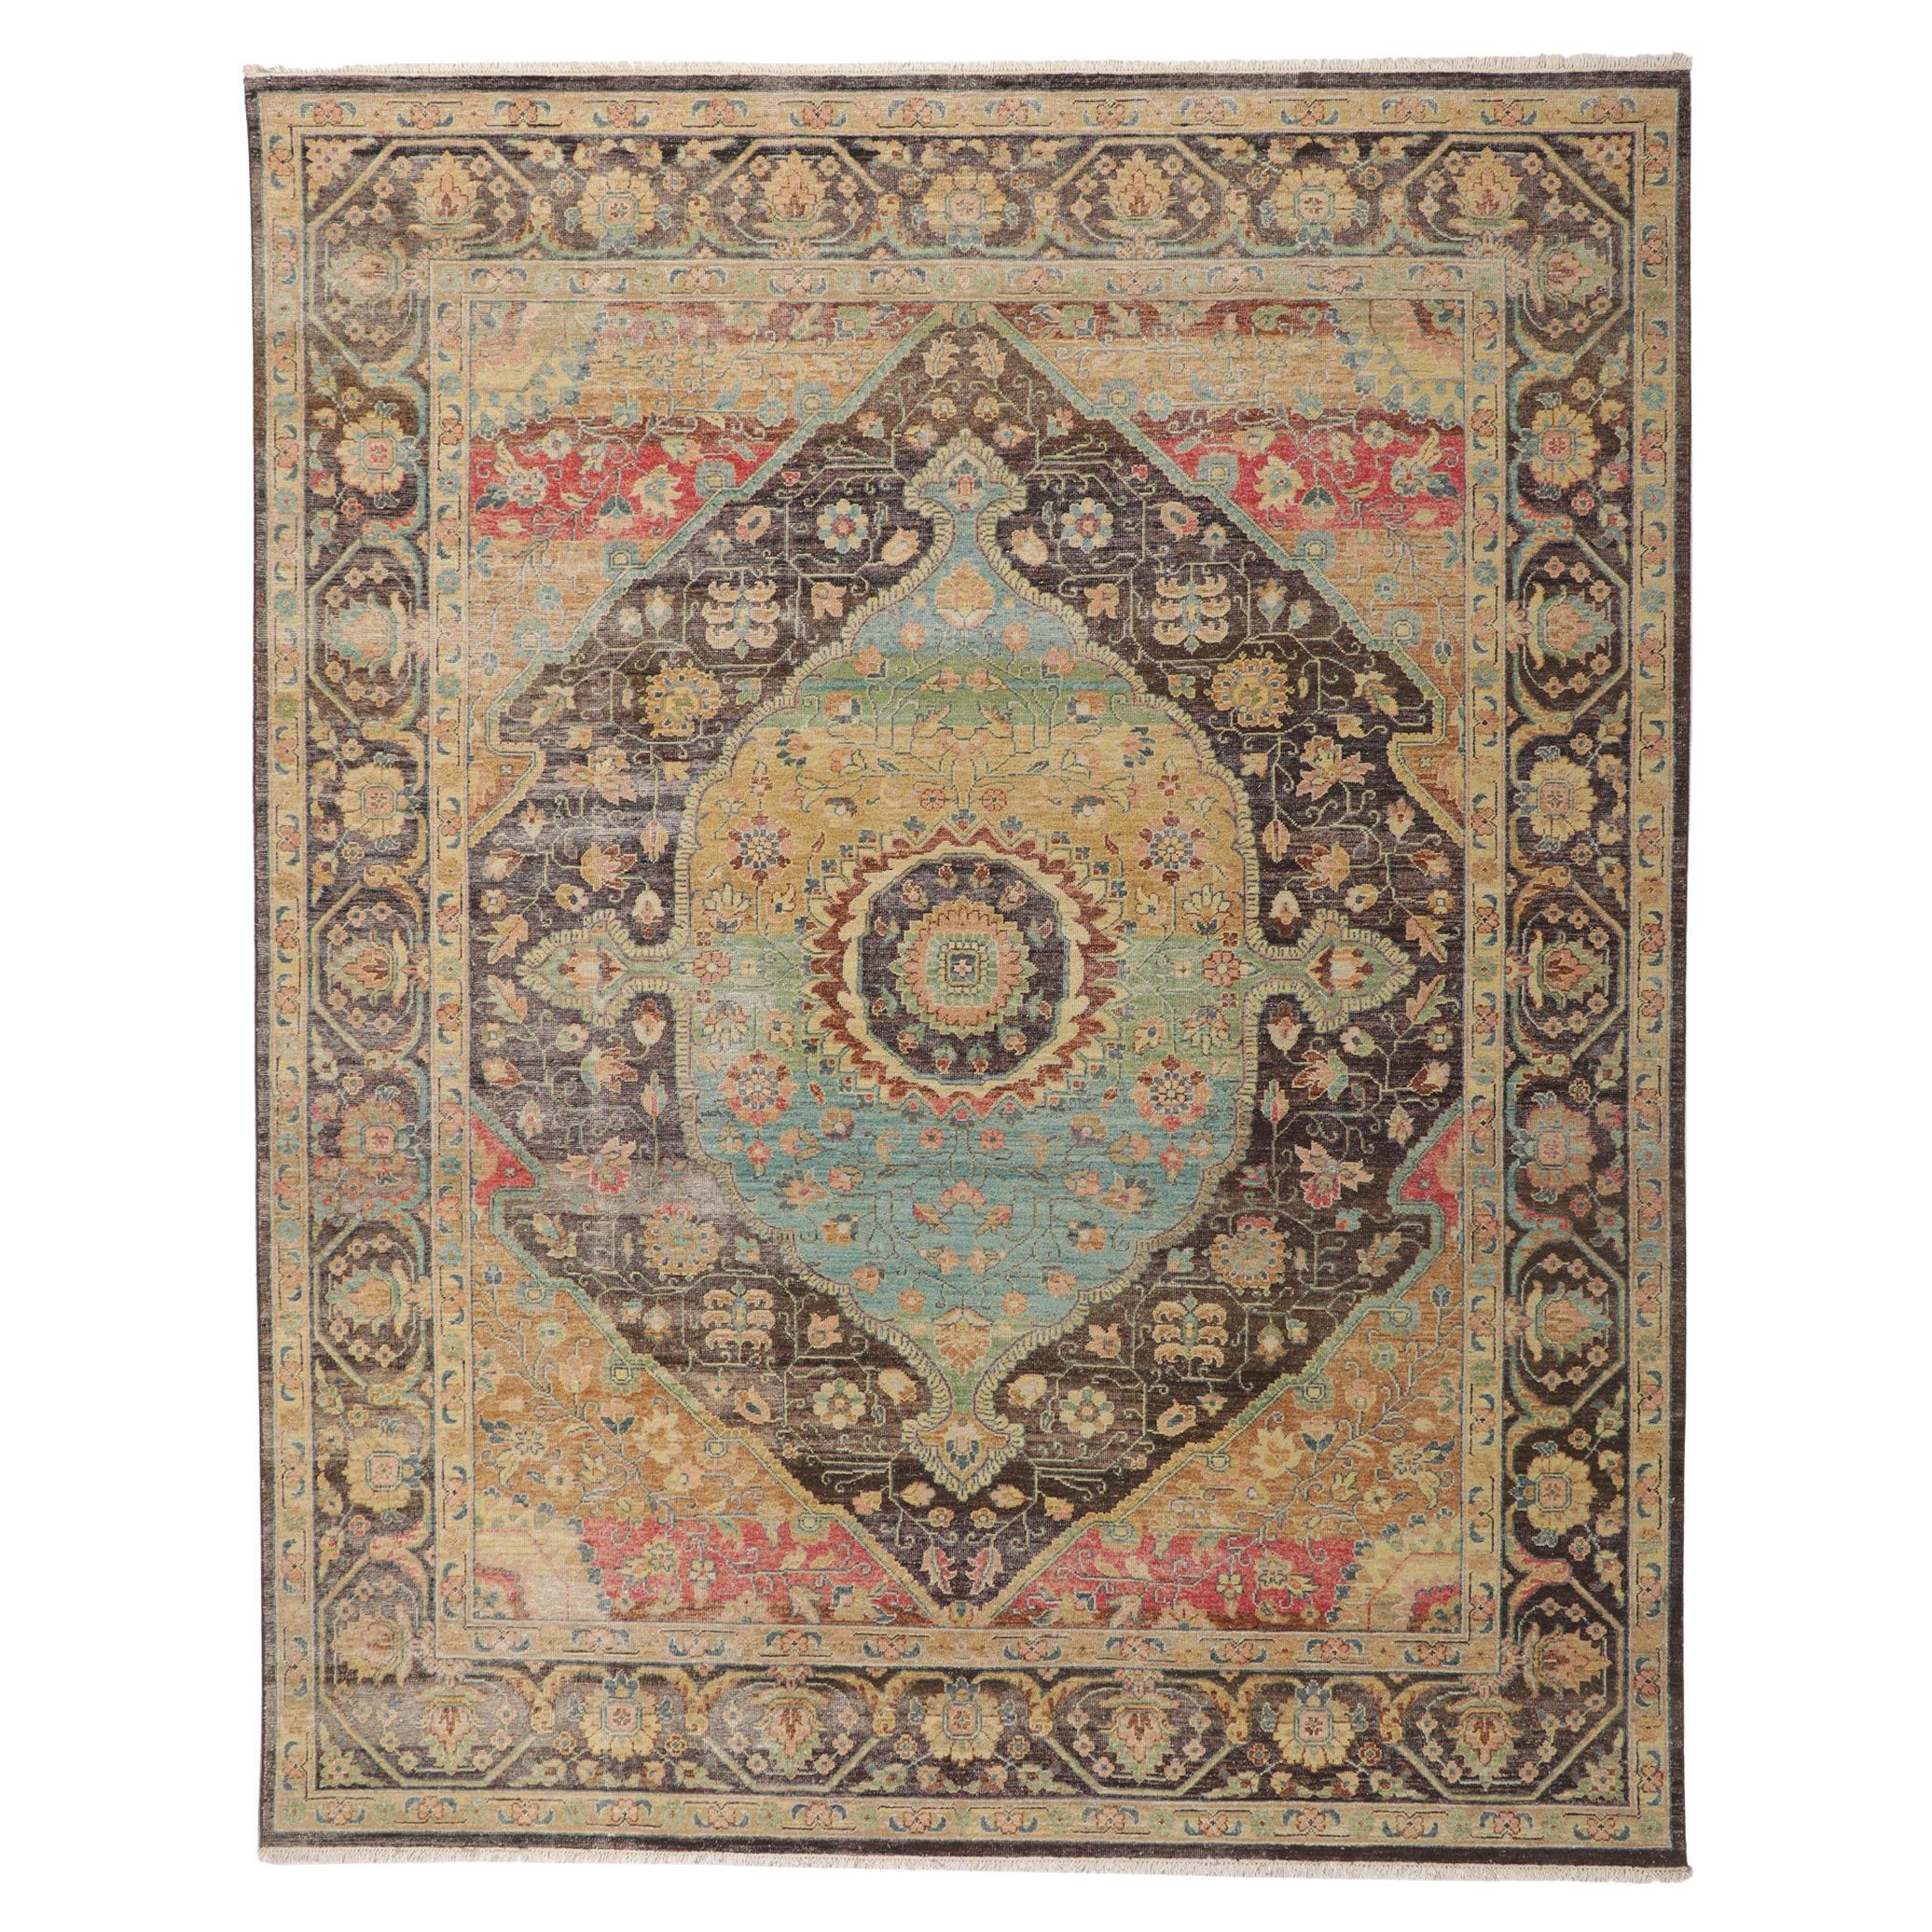 New Vintage-Style Distressed Rug with Faded Earth-Tone Colors